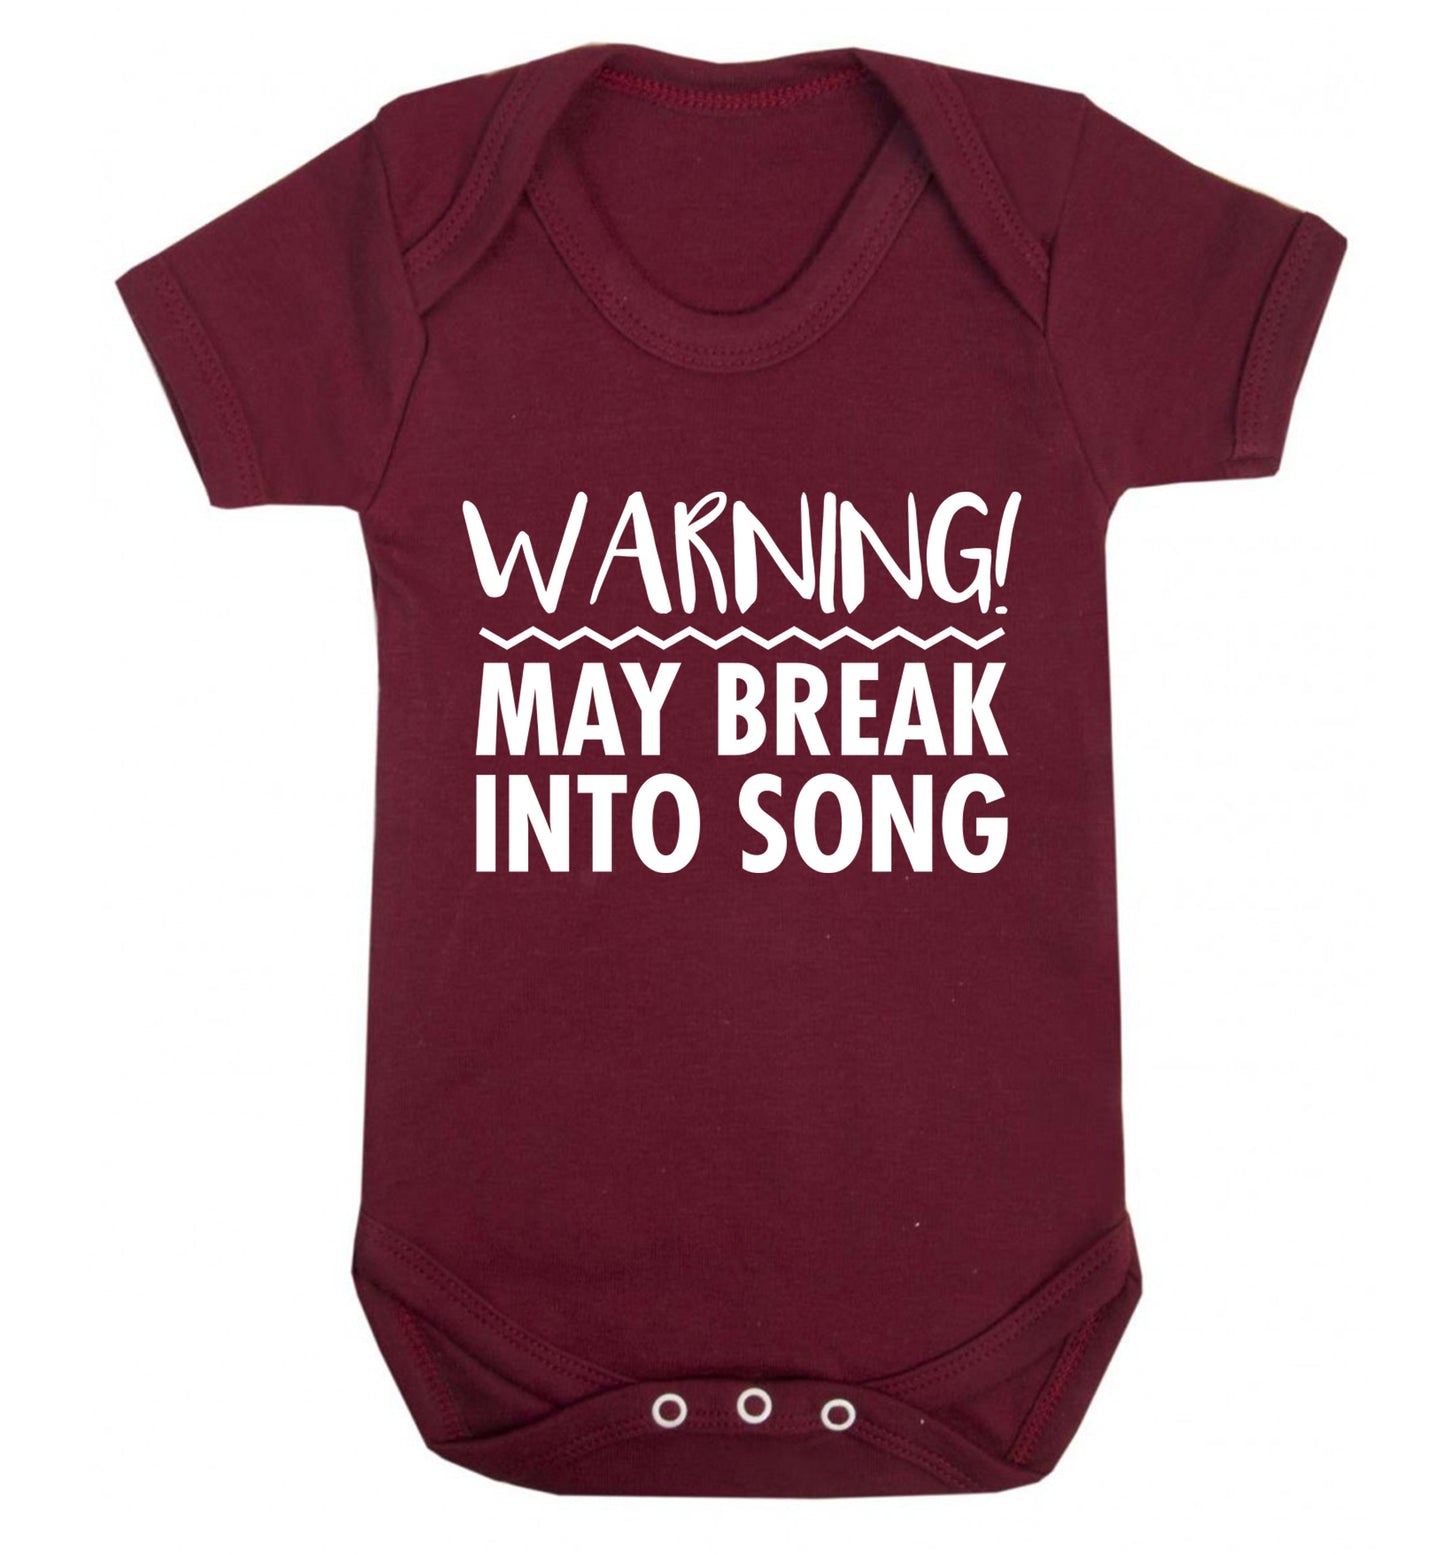 Warning may break into song Baby Vest maroon 18-24 months